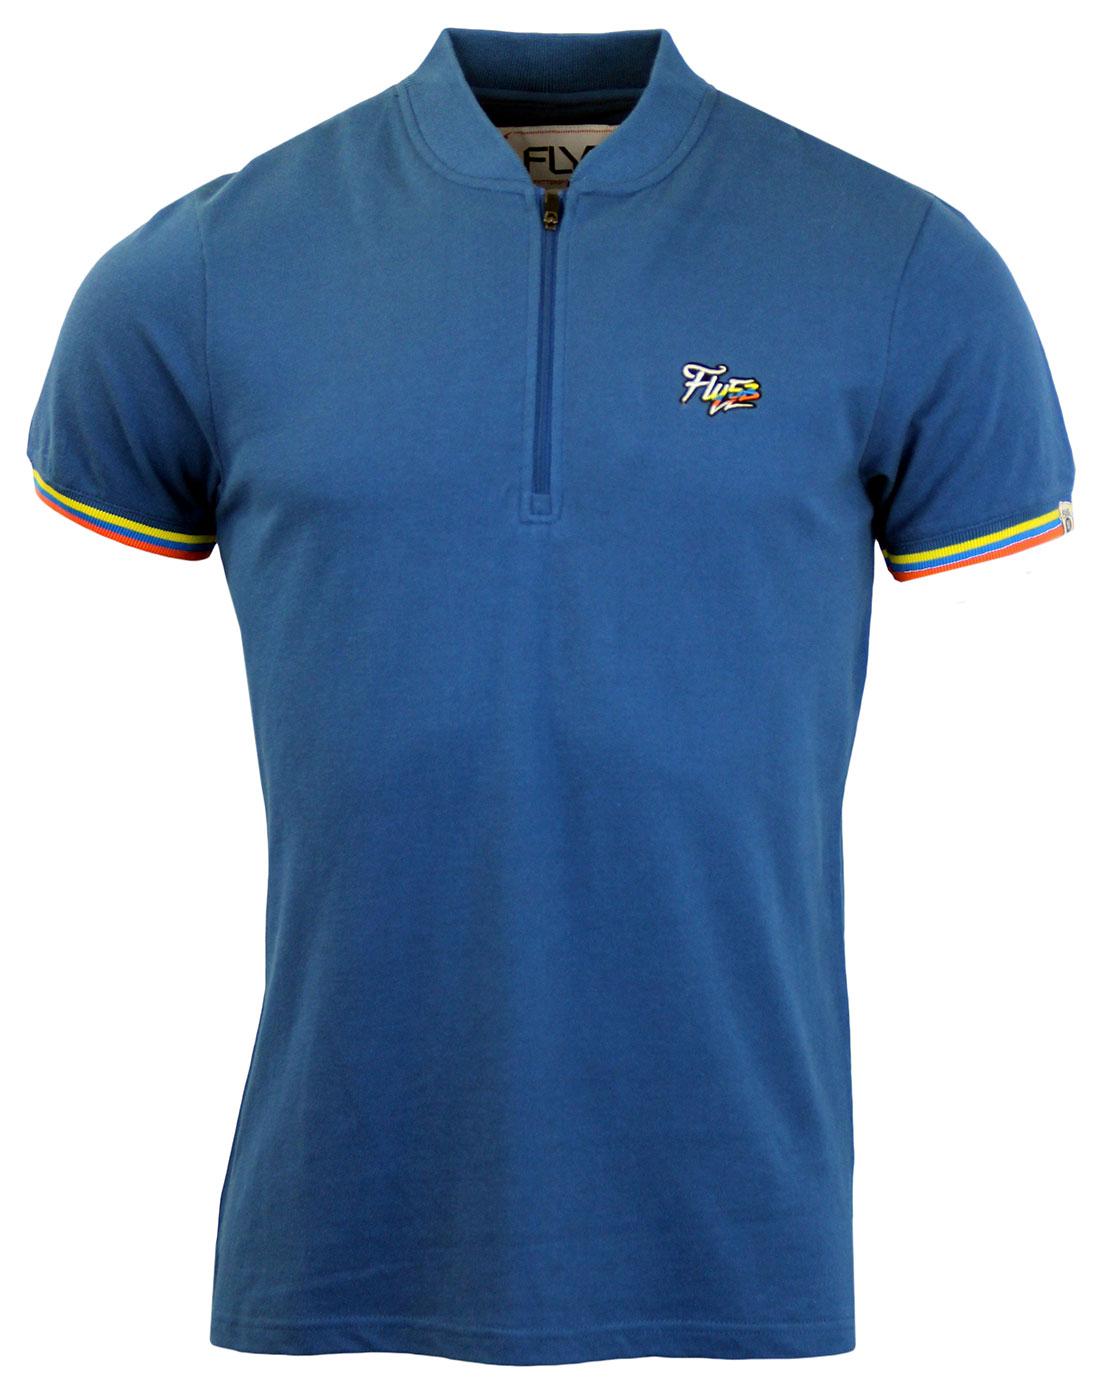 Musette FLY53 Retro Mod Zip Neck Cycling T-shirt